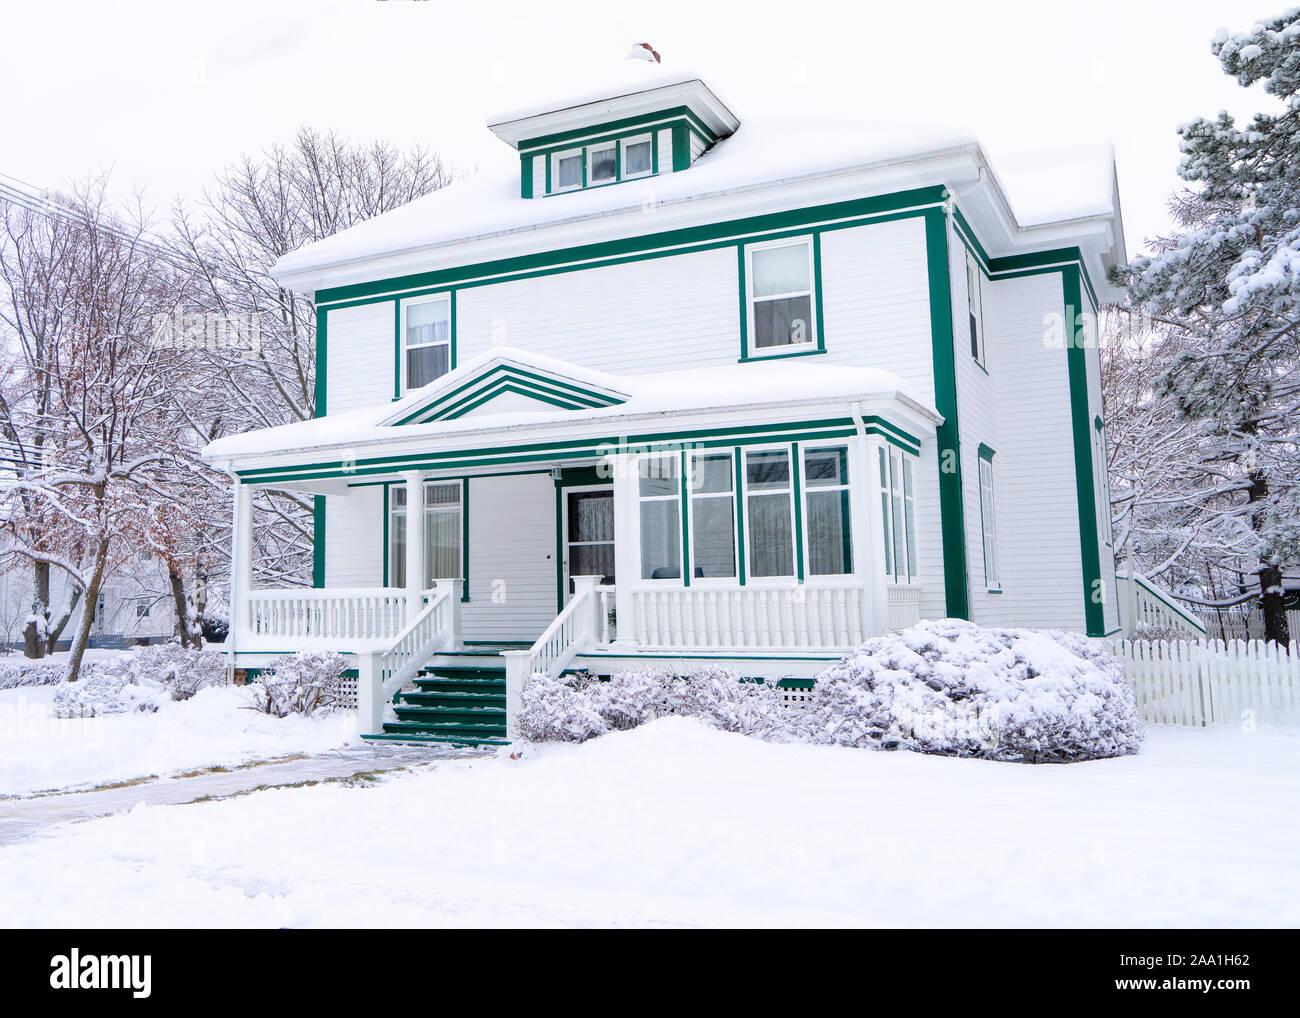 Older traditional style home after a snowfall. Stock Photo